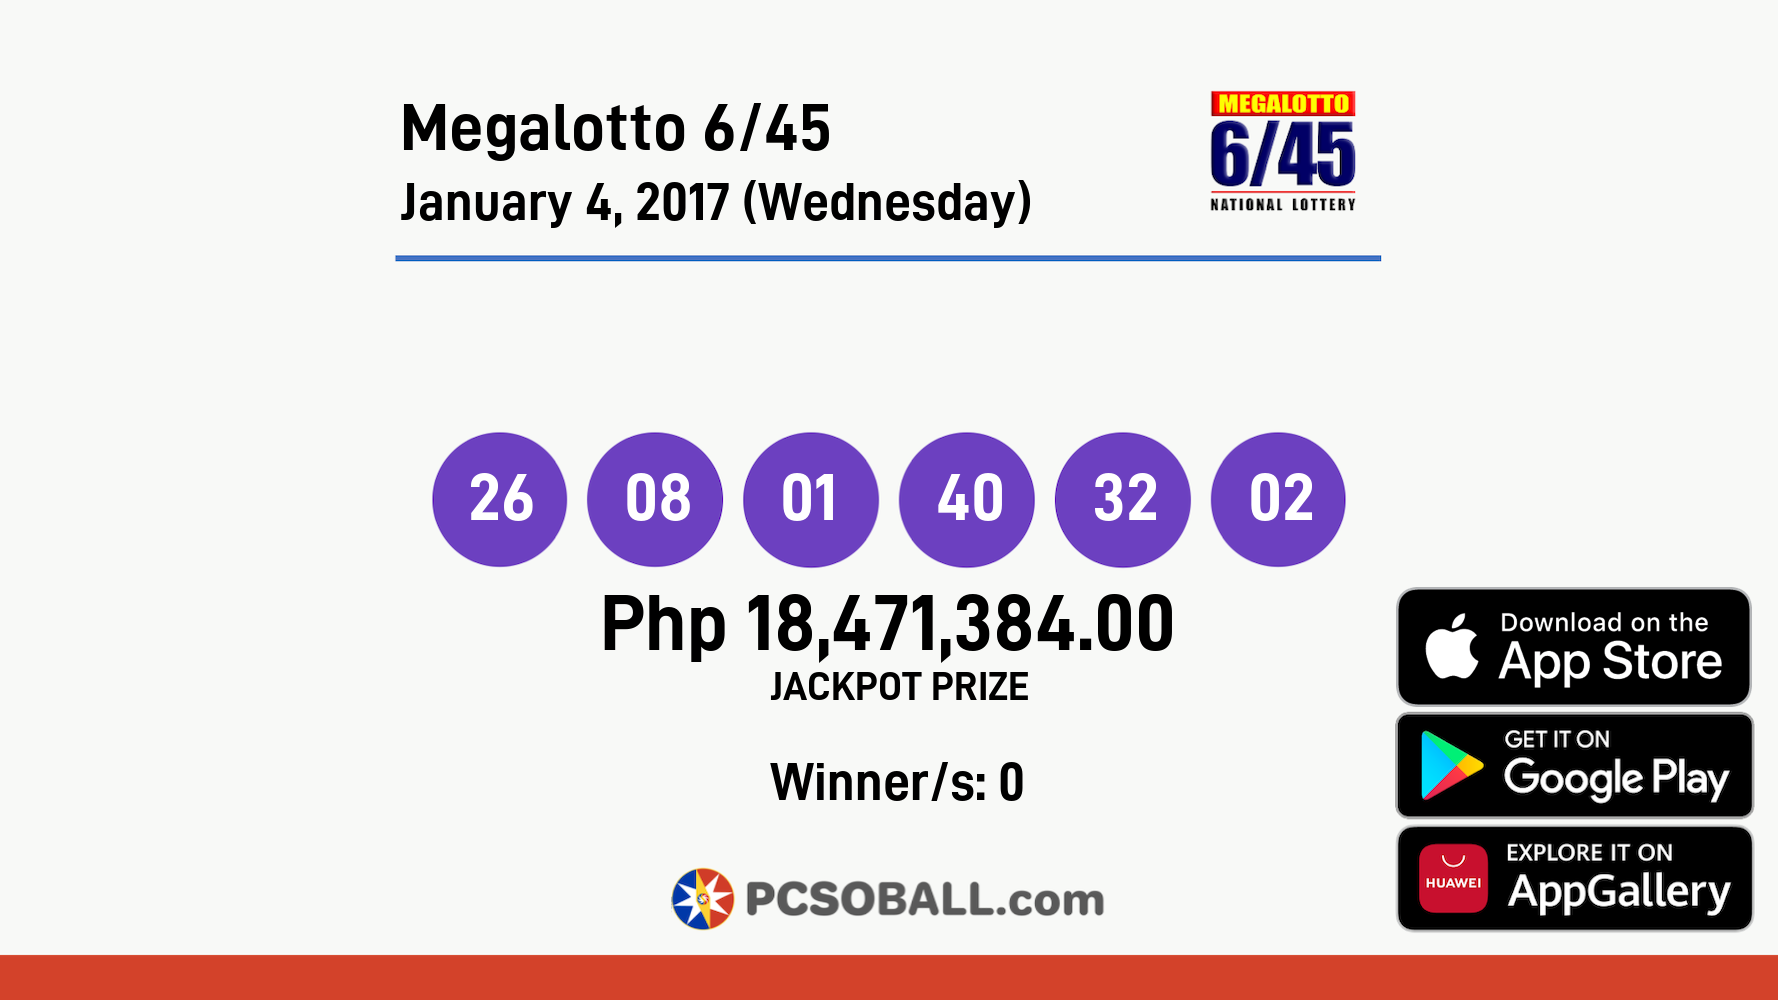 Megalotto 6/45 January 4, 2017 (Wednesday) Result